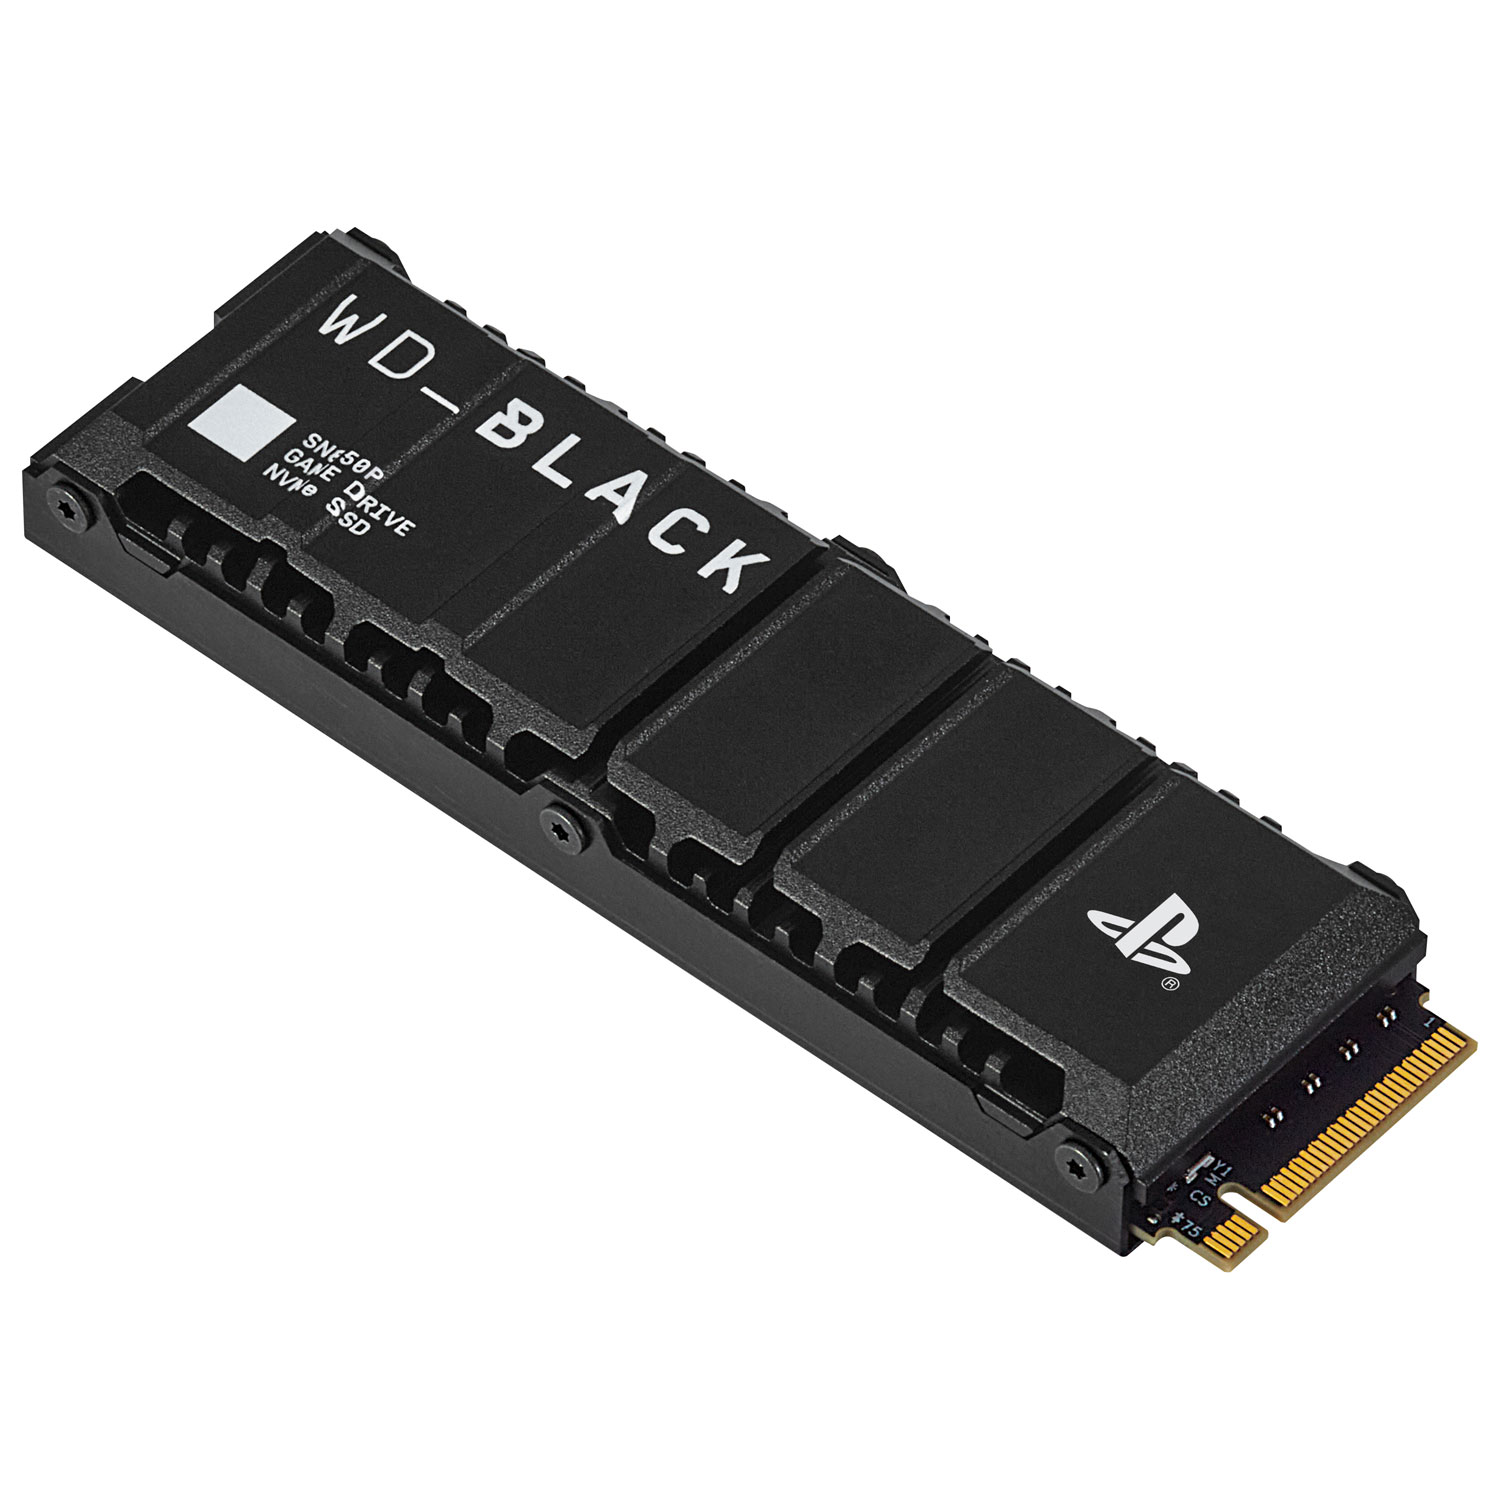 WD_BLACK SN850P 2TB NVMe PCI-e Internal Solid State Drive with 